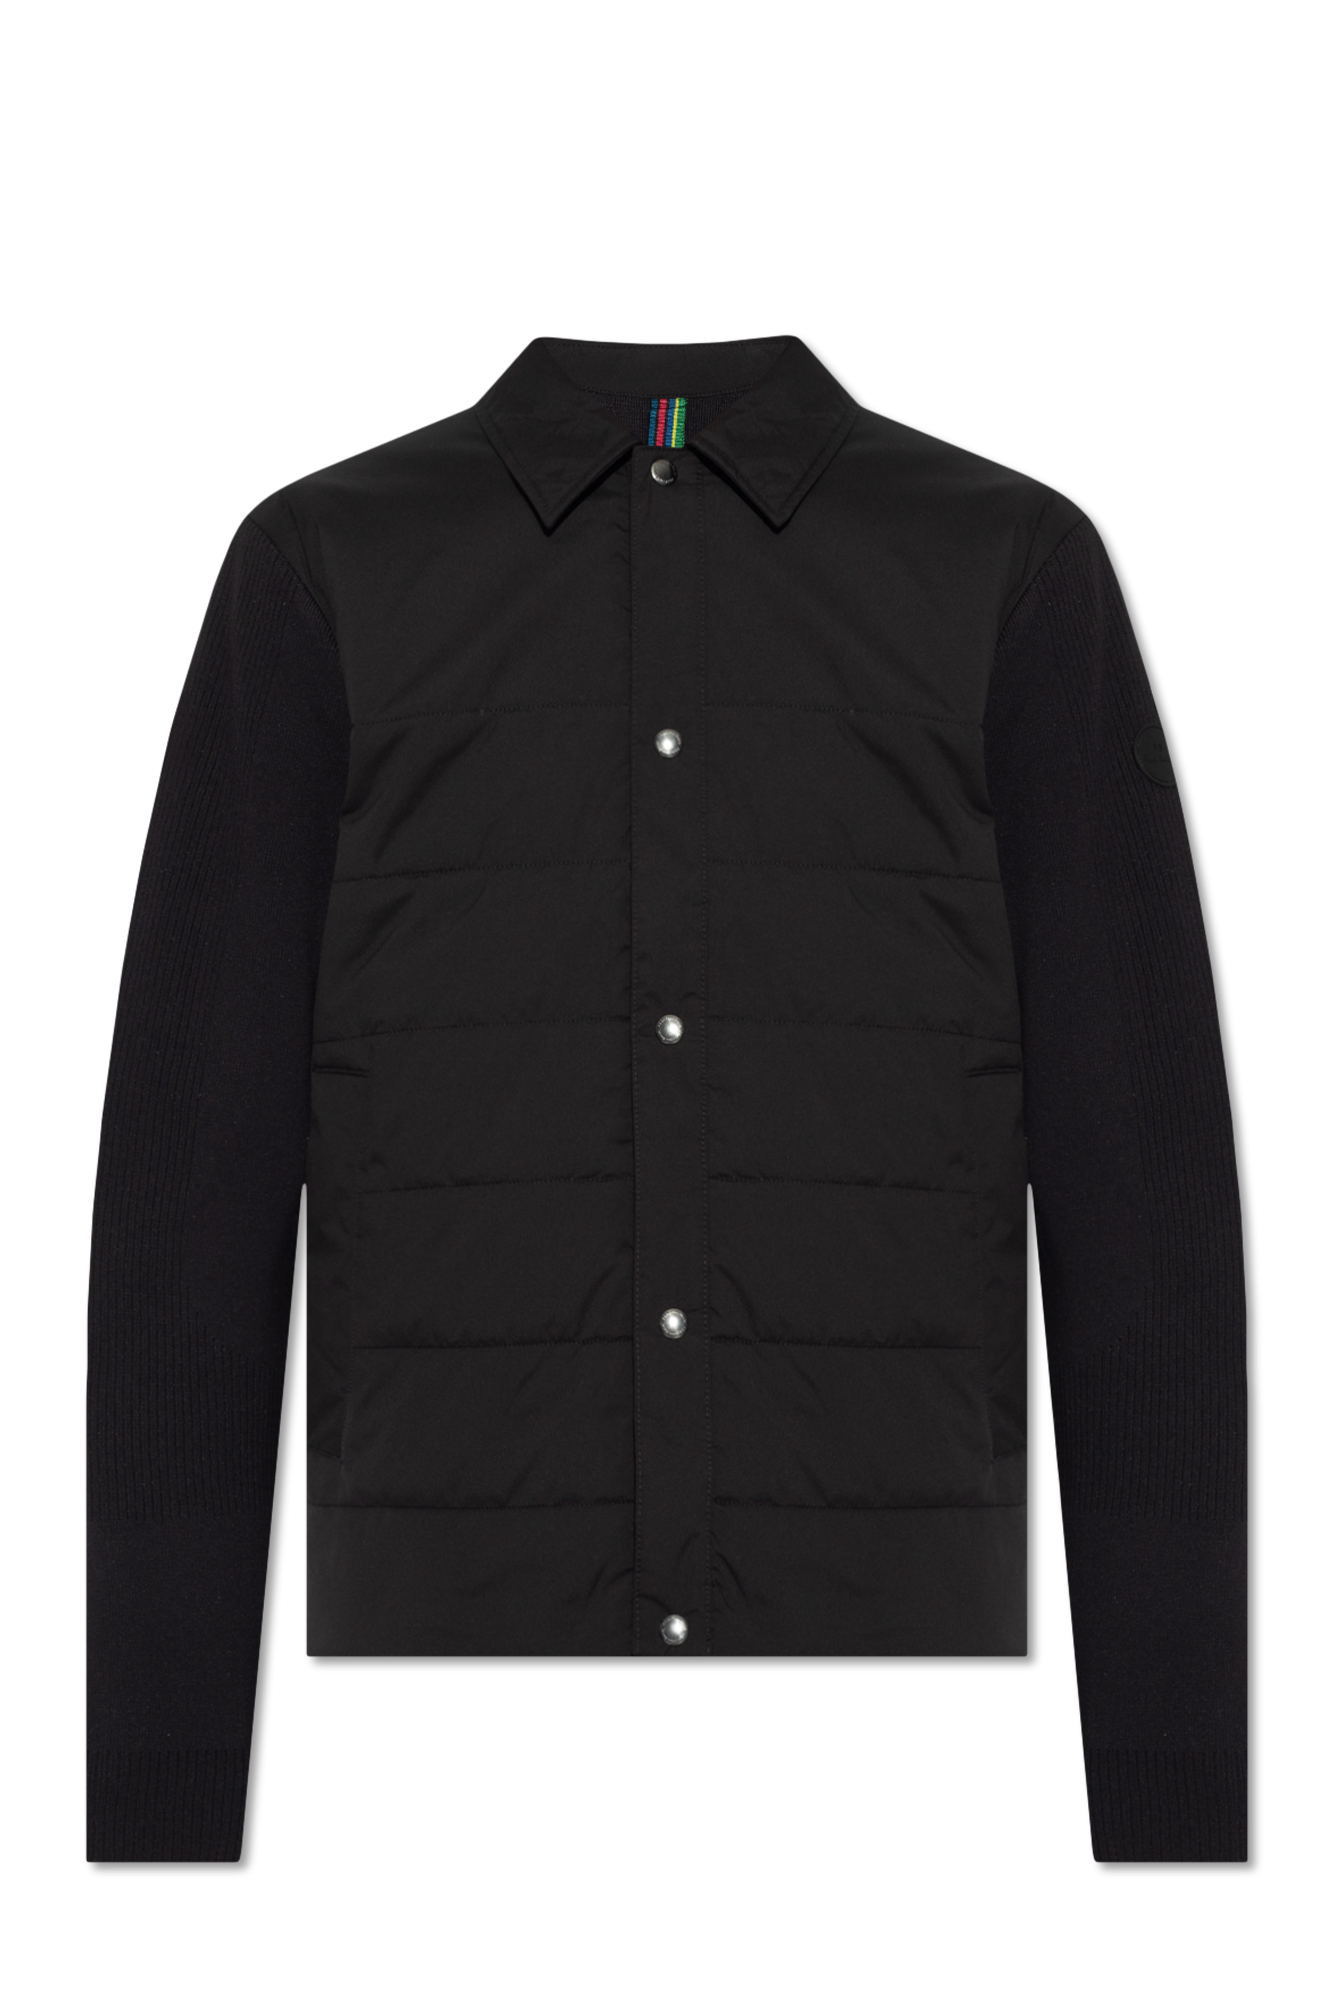 Black Jacket With Insulated Front Ps Paul Smith Vitkac Gb